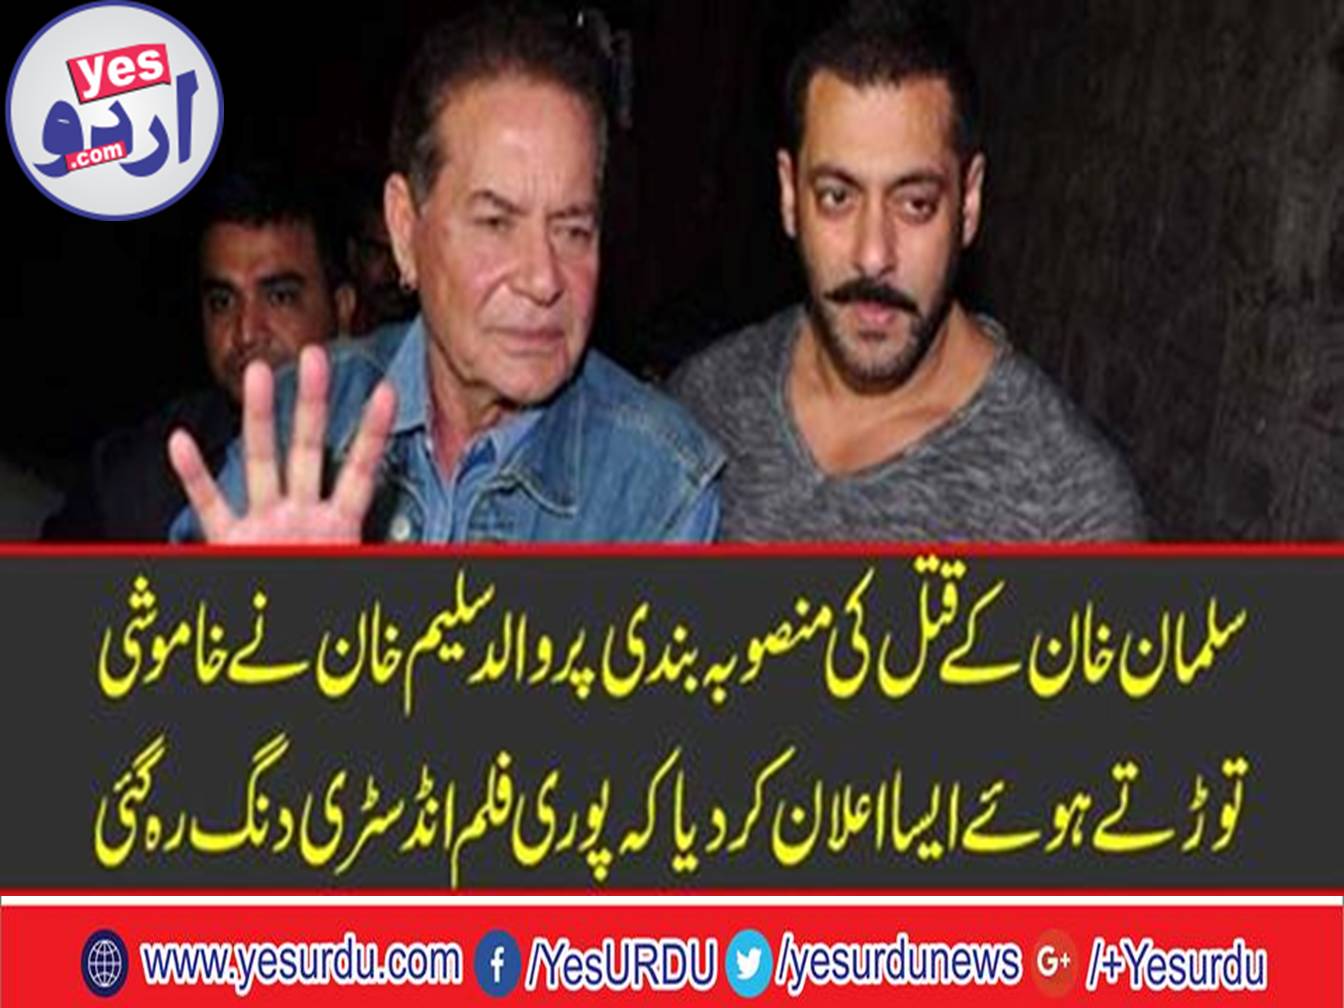 Famous script writer Saleem Khan and his father also broke silence on the threats of murder to Bollywood Sultan Salman Khan